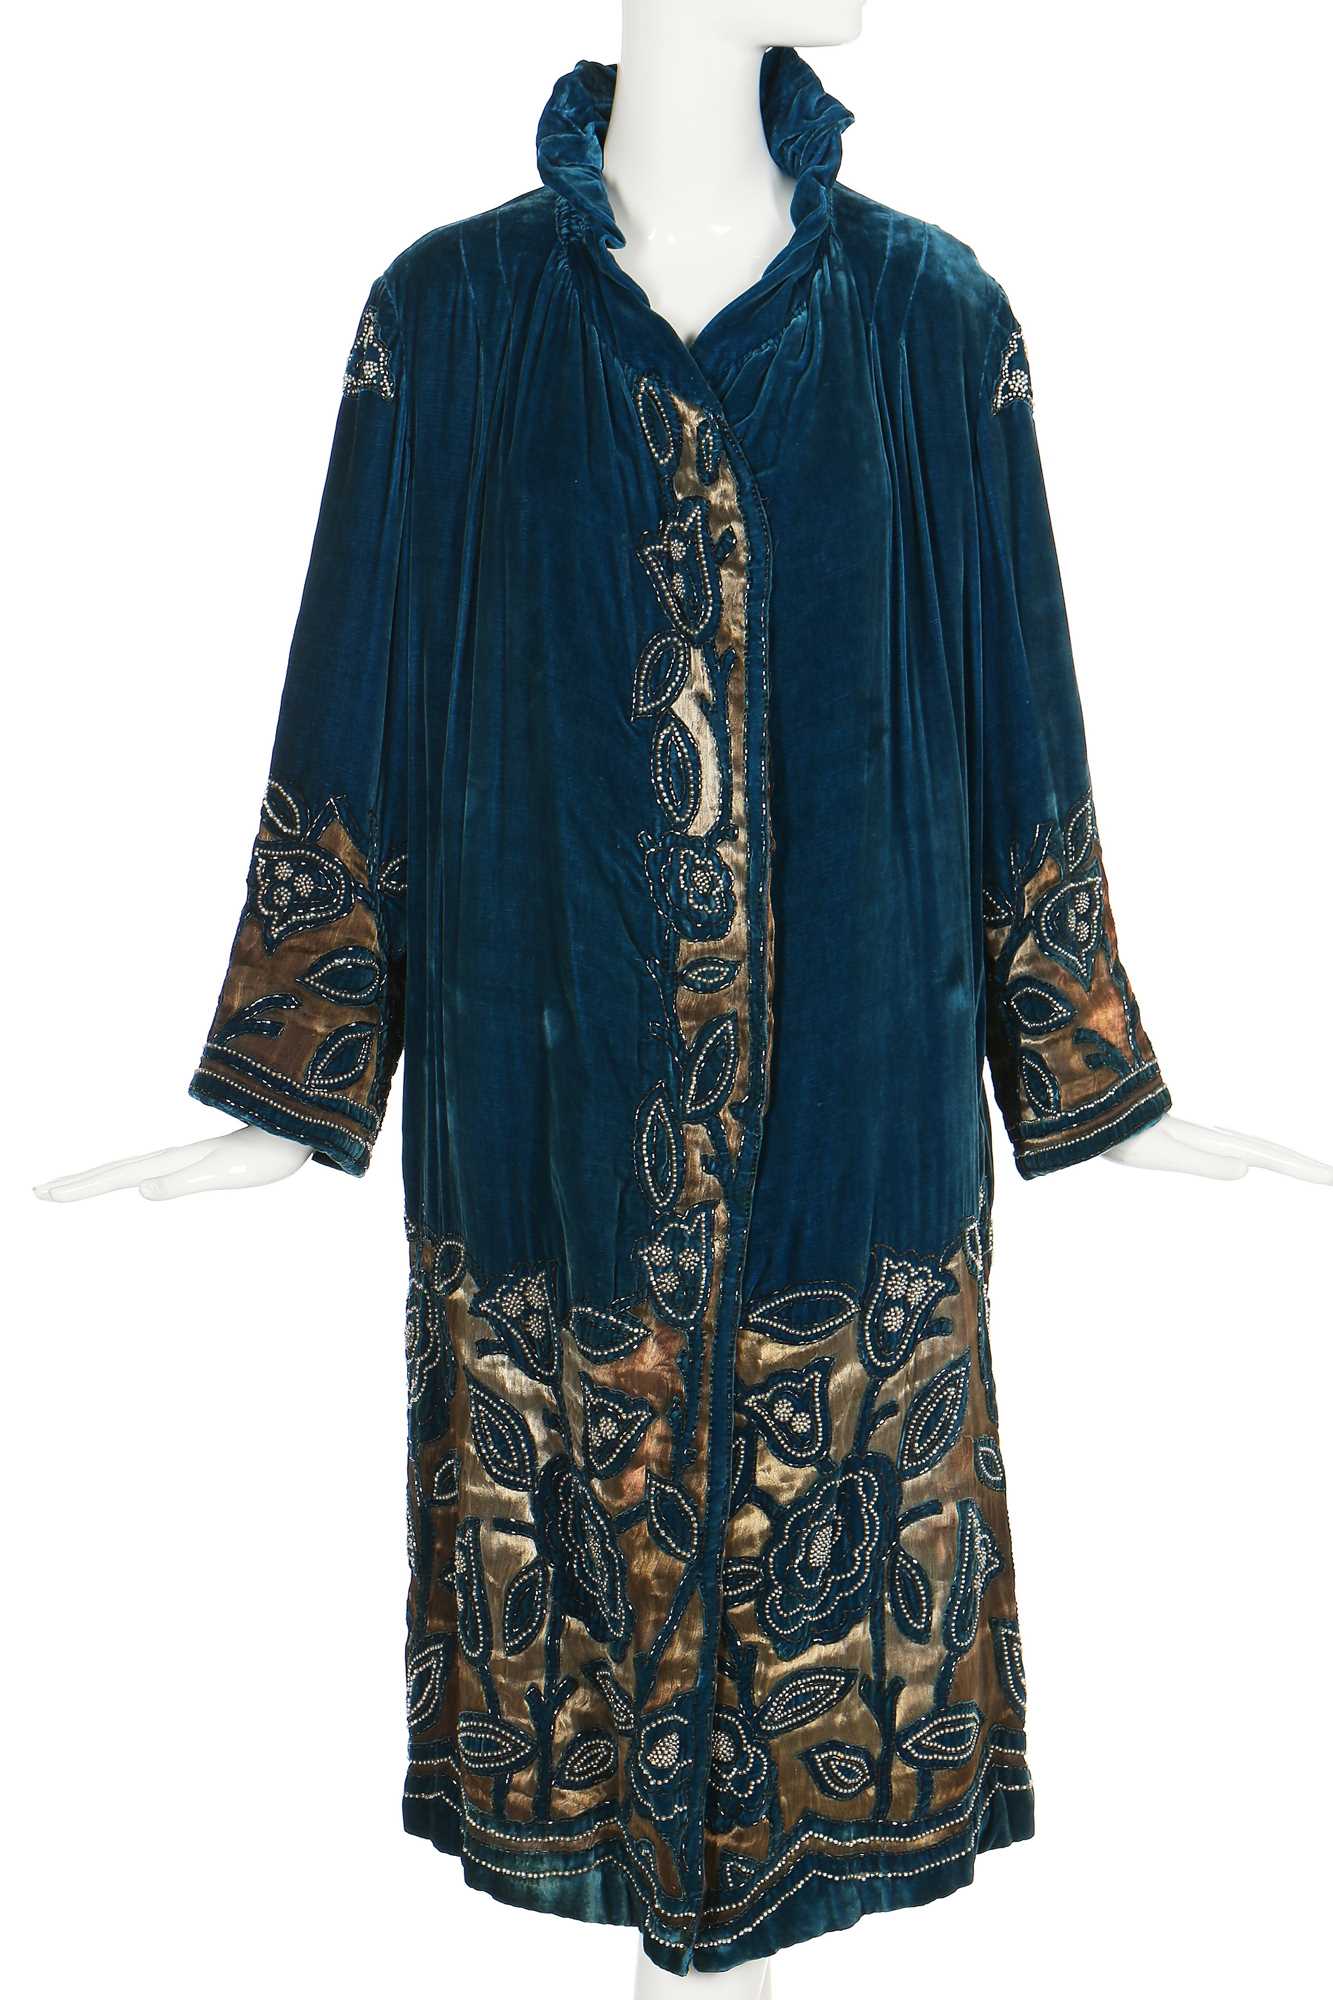 Lot 70 - A Steins of New York teal cut-velvet and lamé opera coat, 1930s